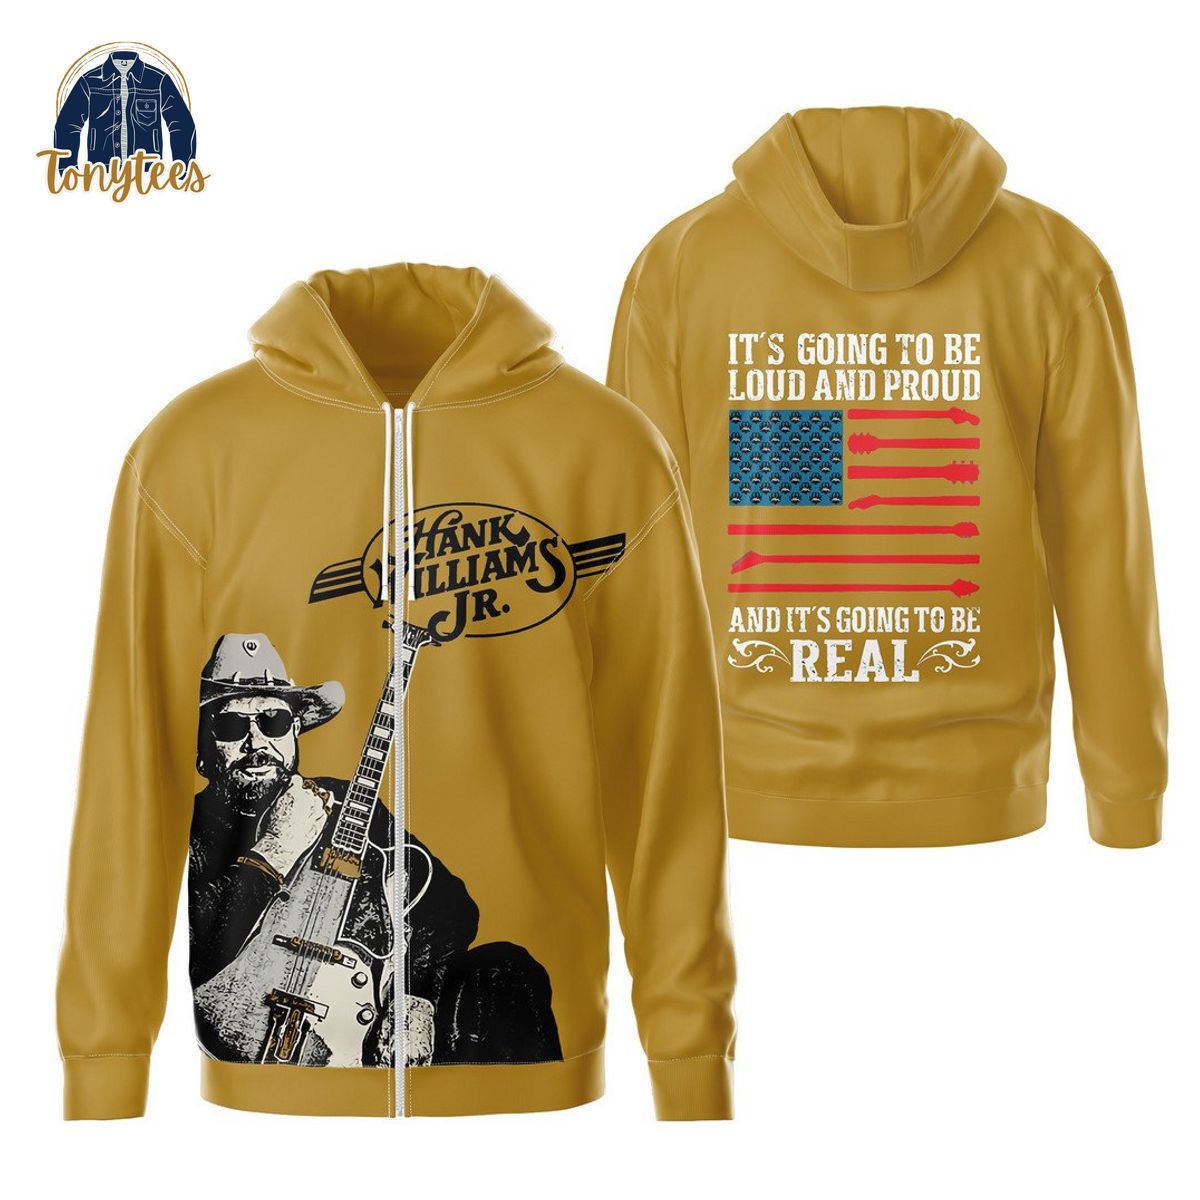 Hank Williams Jr. it’s going to be loud and proud 3d hoodie shirt